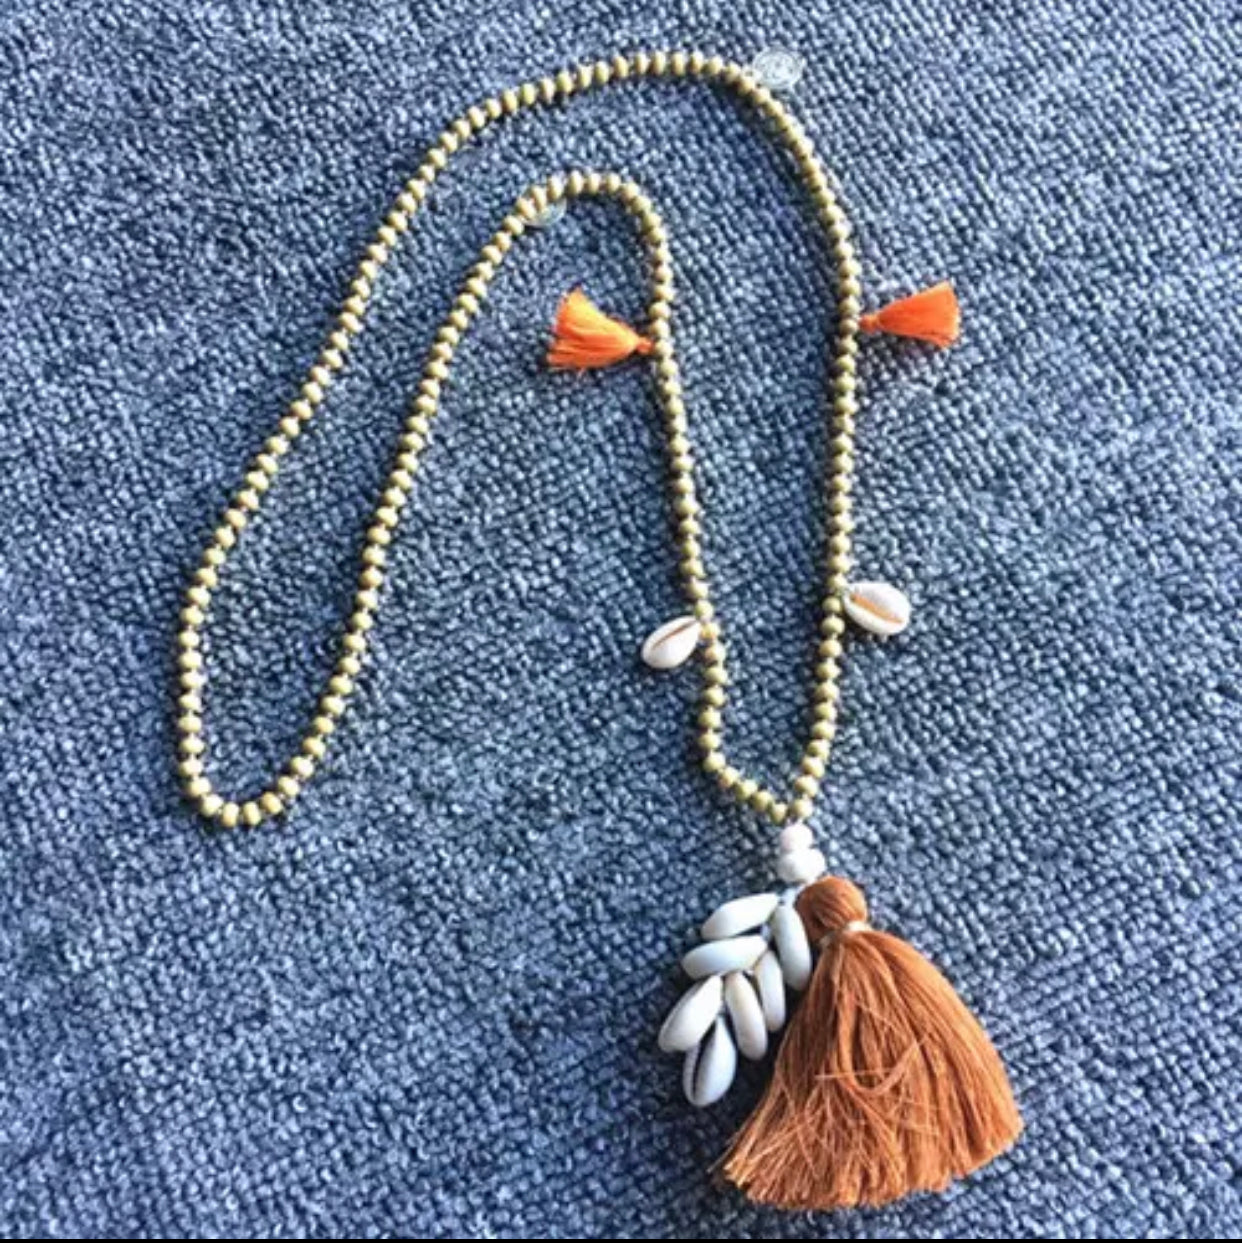 Wooden Beads Necklace with Cowry Shells and Mustard Cotton Tassels